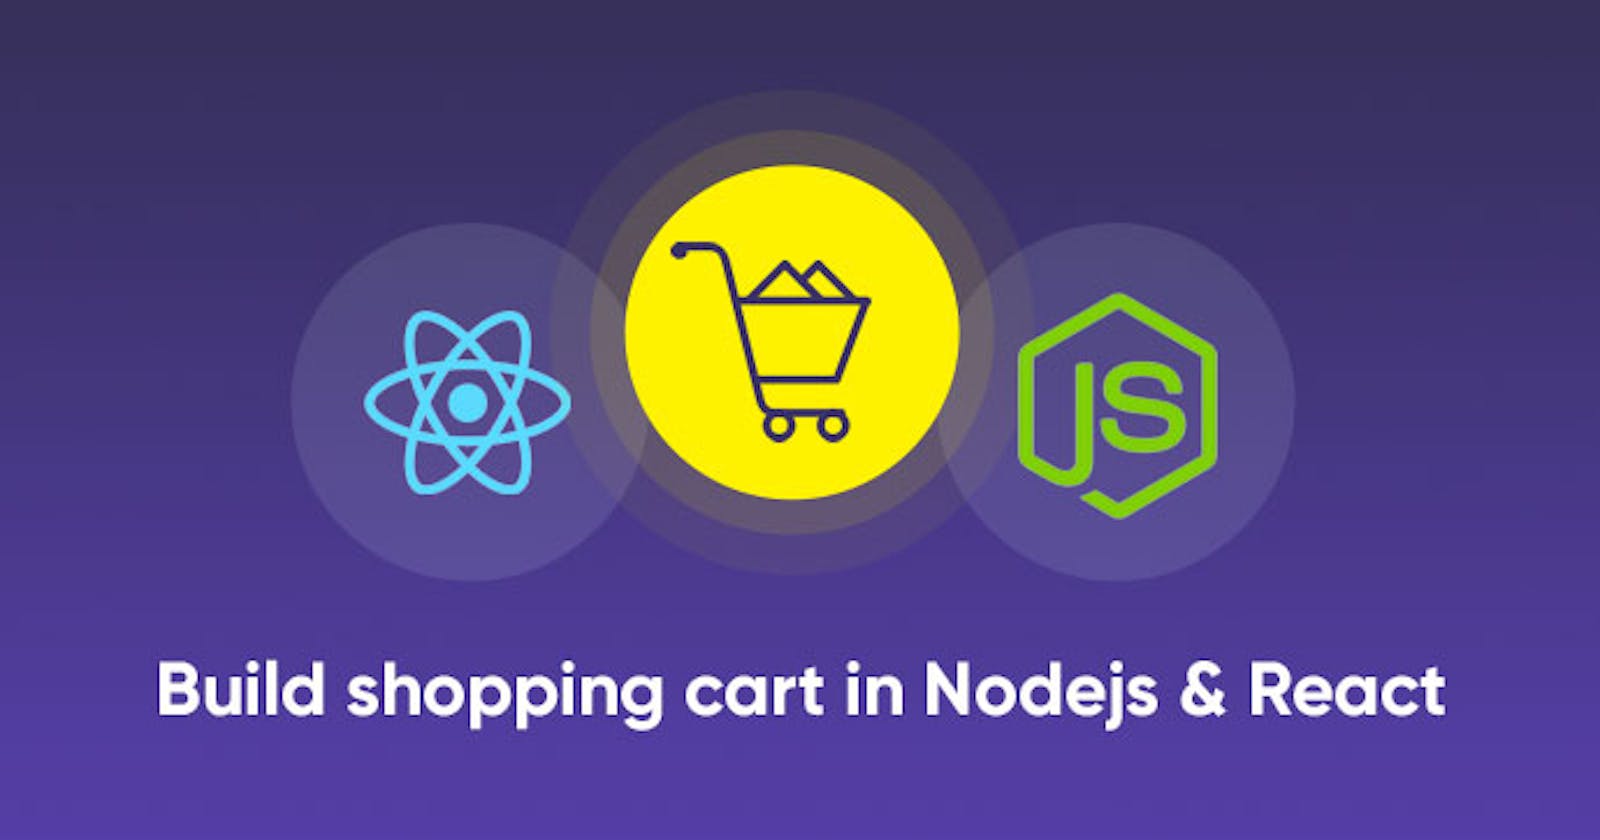 Build a shopping cart in Nodejs and React